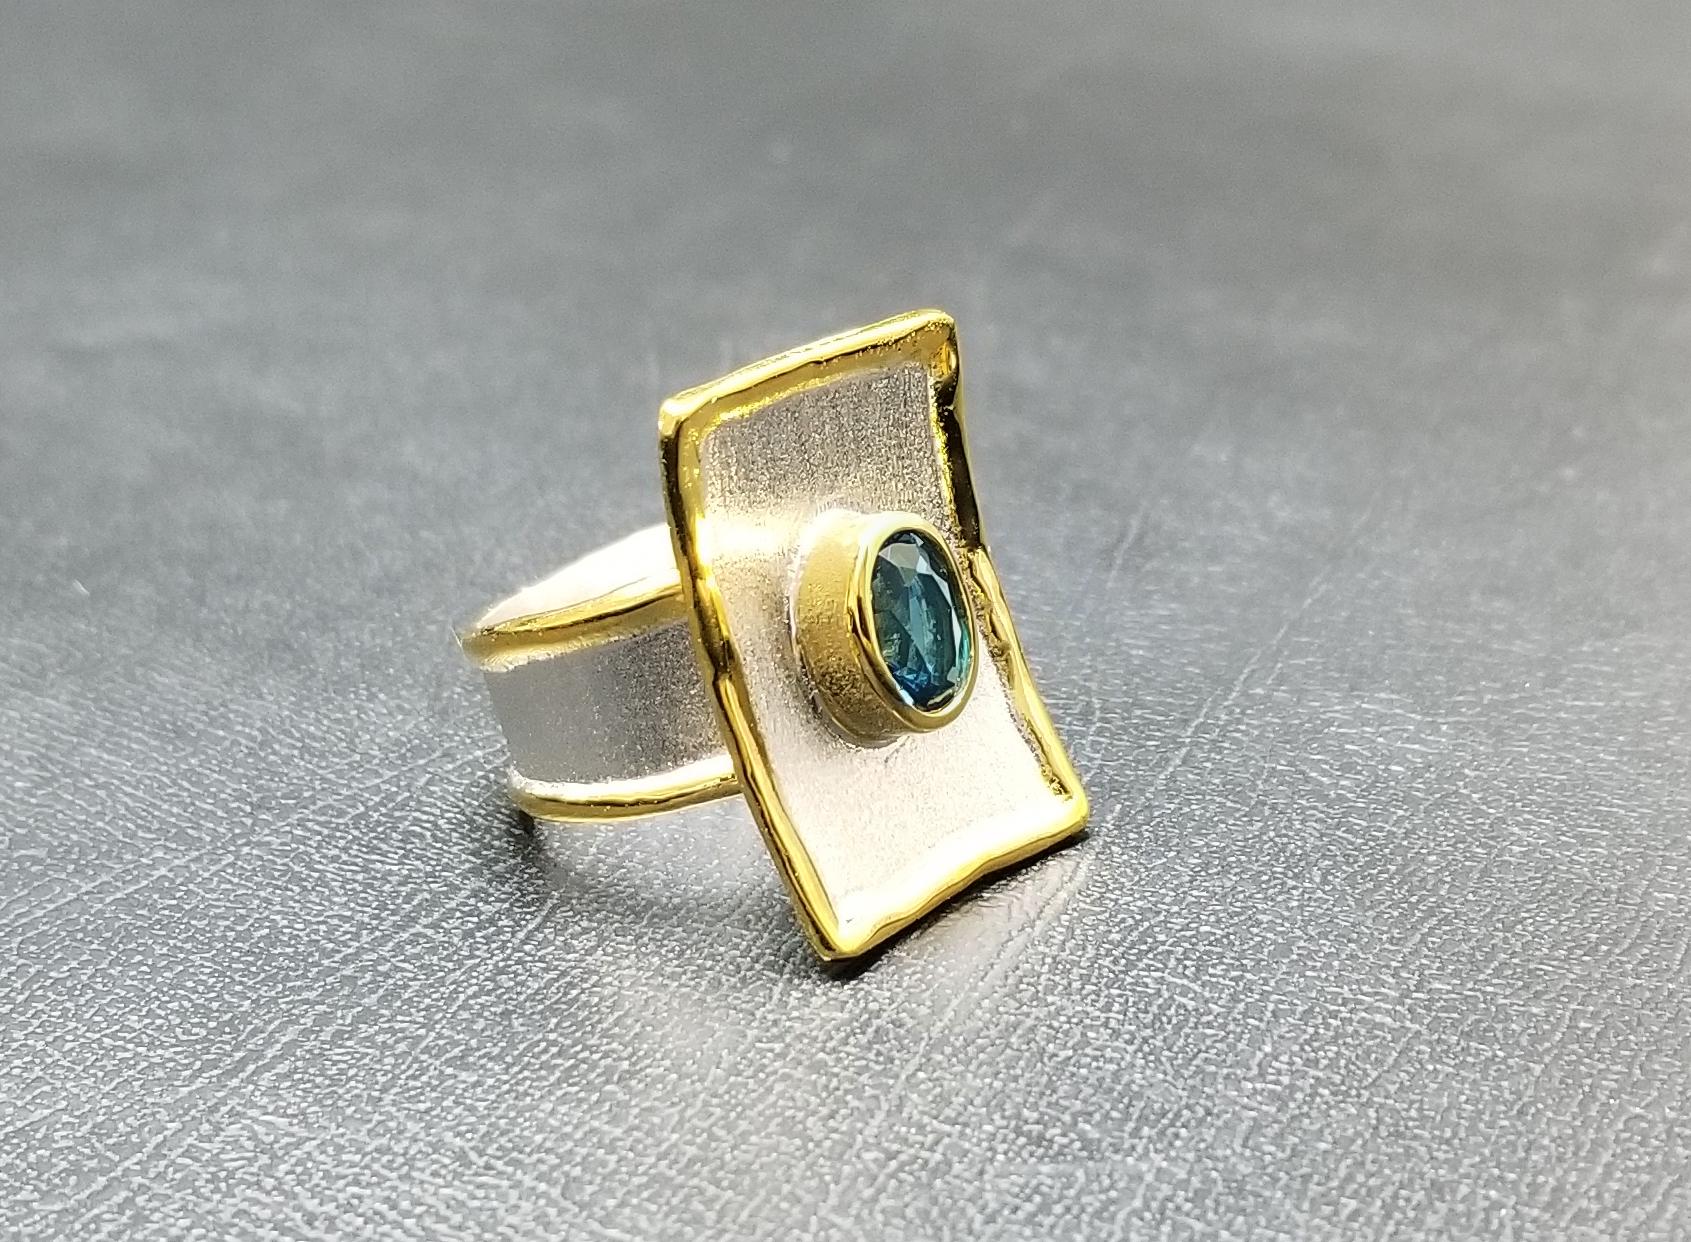 From Yianni Creations Midas Collection this is a fully handcrafted ring from a fine silver plated with palladium and with an overlay of 24 Karat Yellow Gold. The ring features a 1.25 Carat London blue topaz. The unique look of the jewel is created